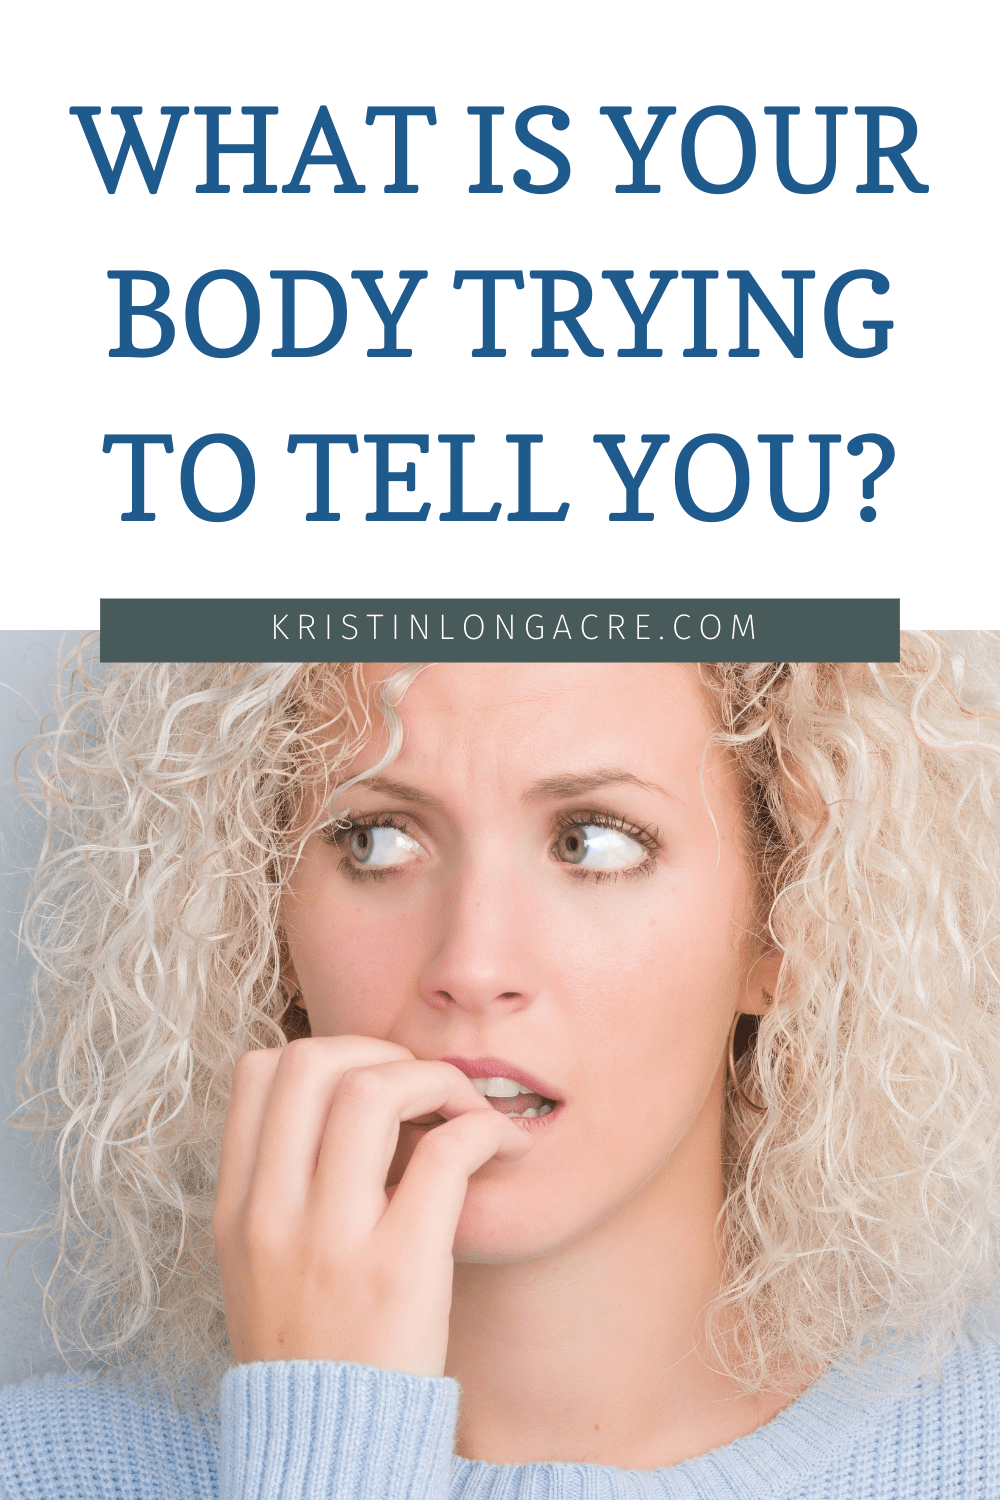 What is Your Body Trying To Tell You?